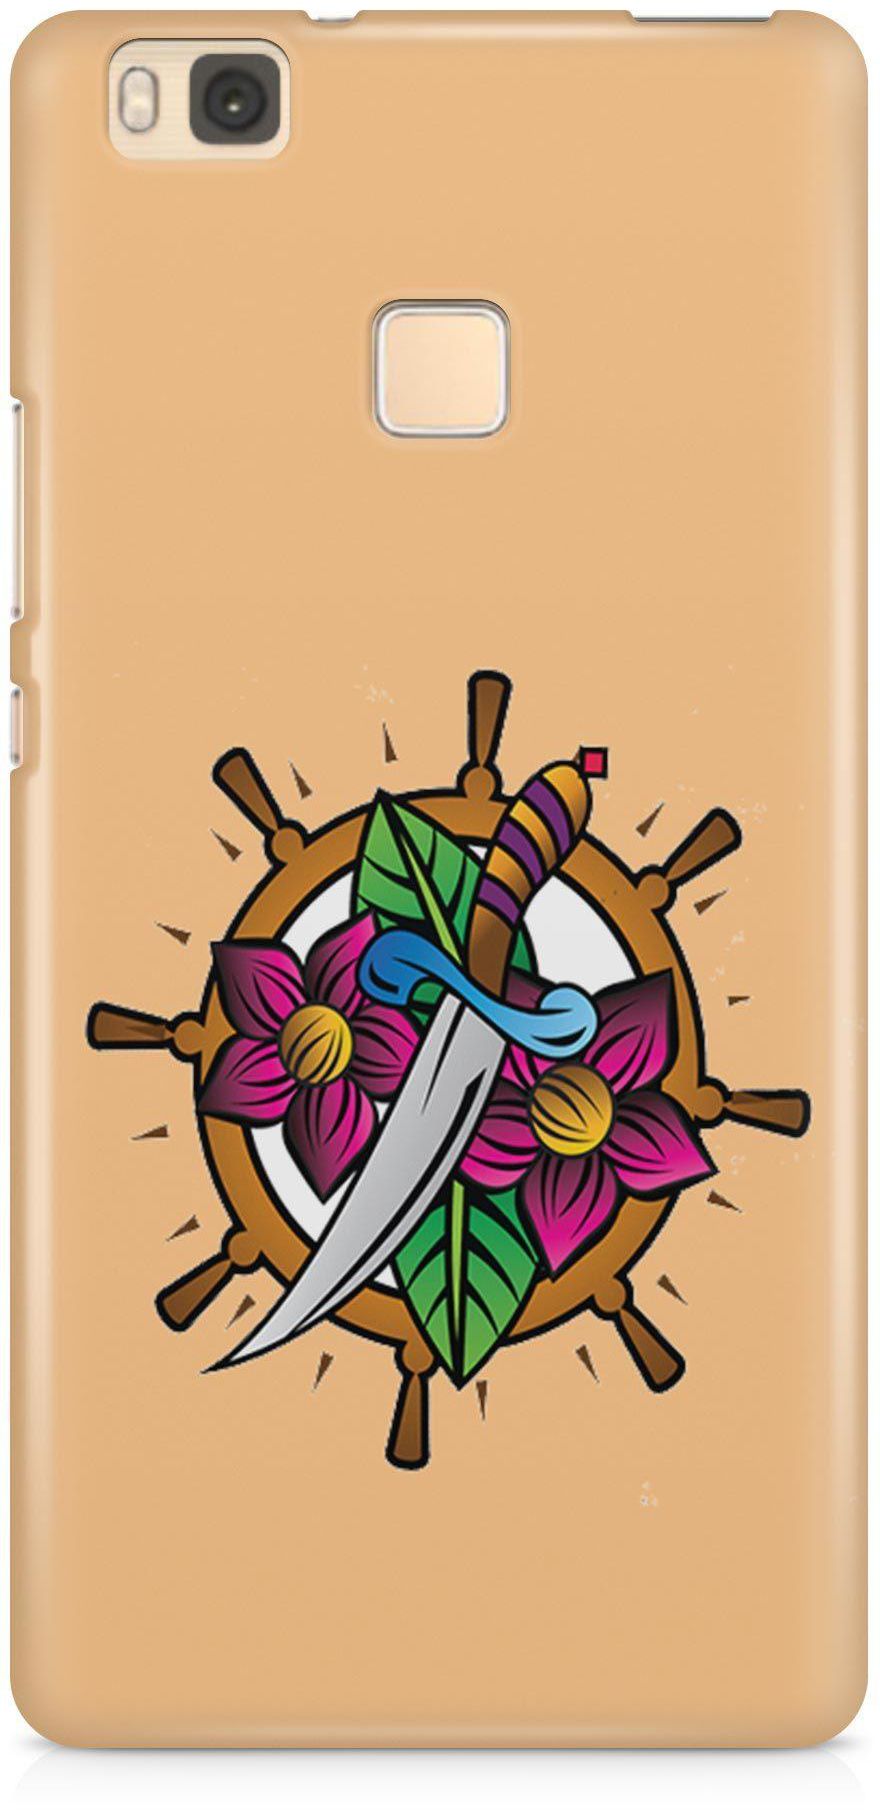 Orange Sword Nuts Coconuts Phone Case Cover for Huawei P8 Lite